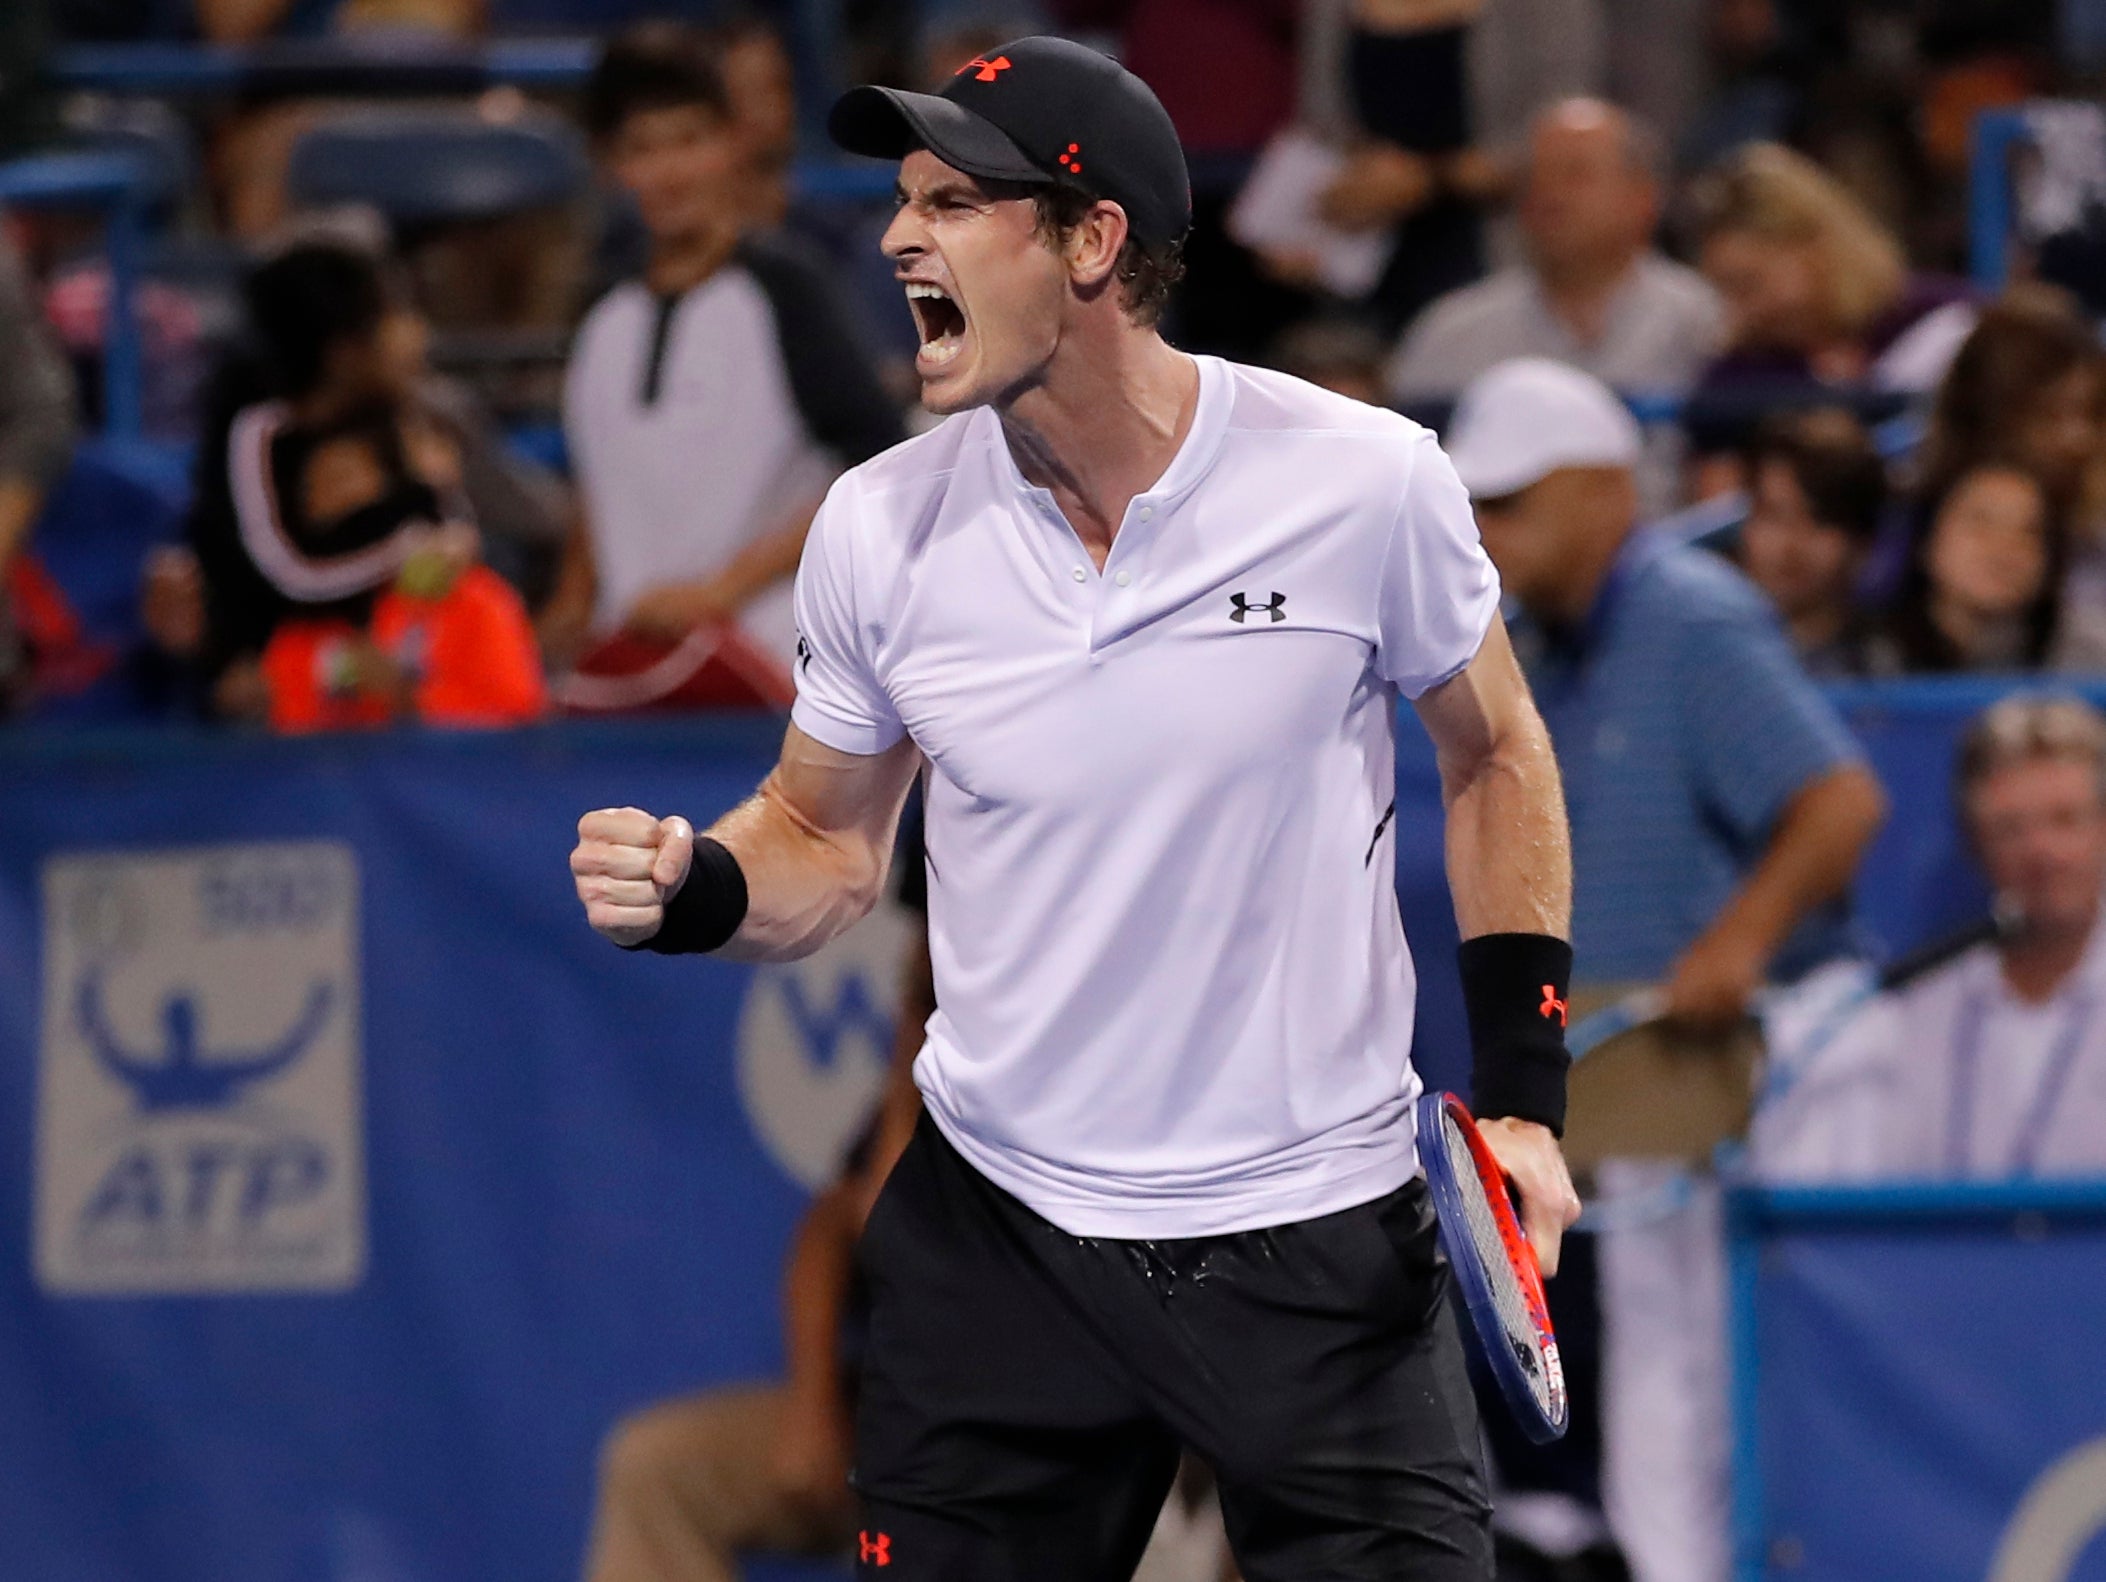 Andy Murray roars with delight after clinching victory by taking the third set 7-5.